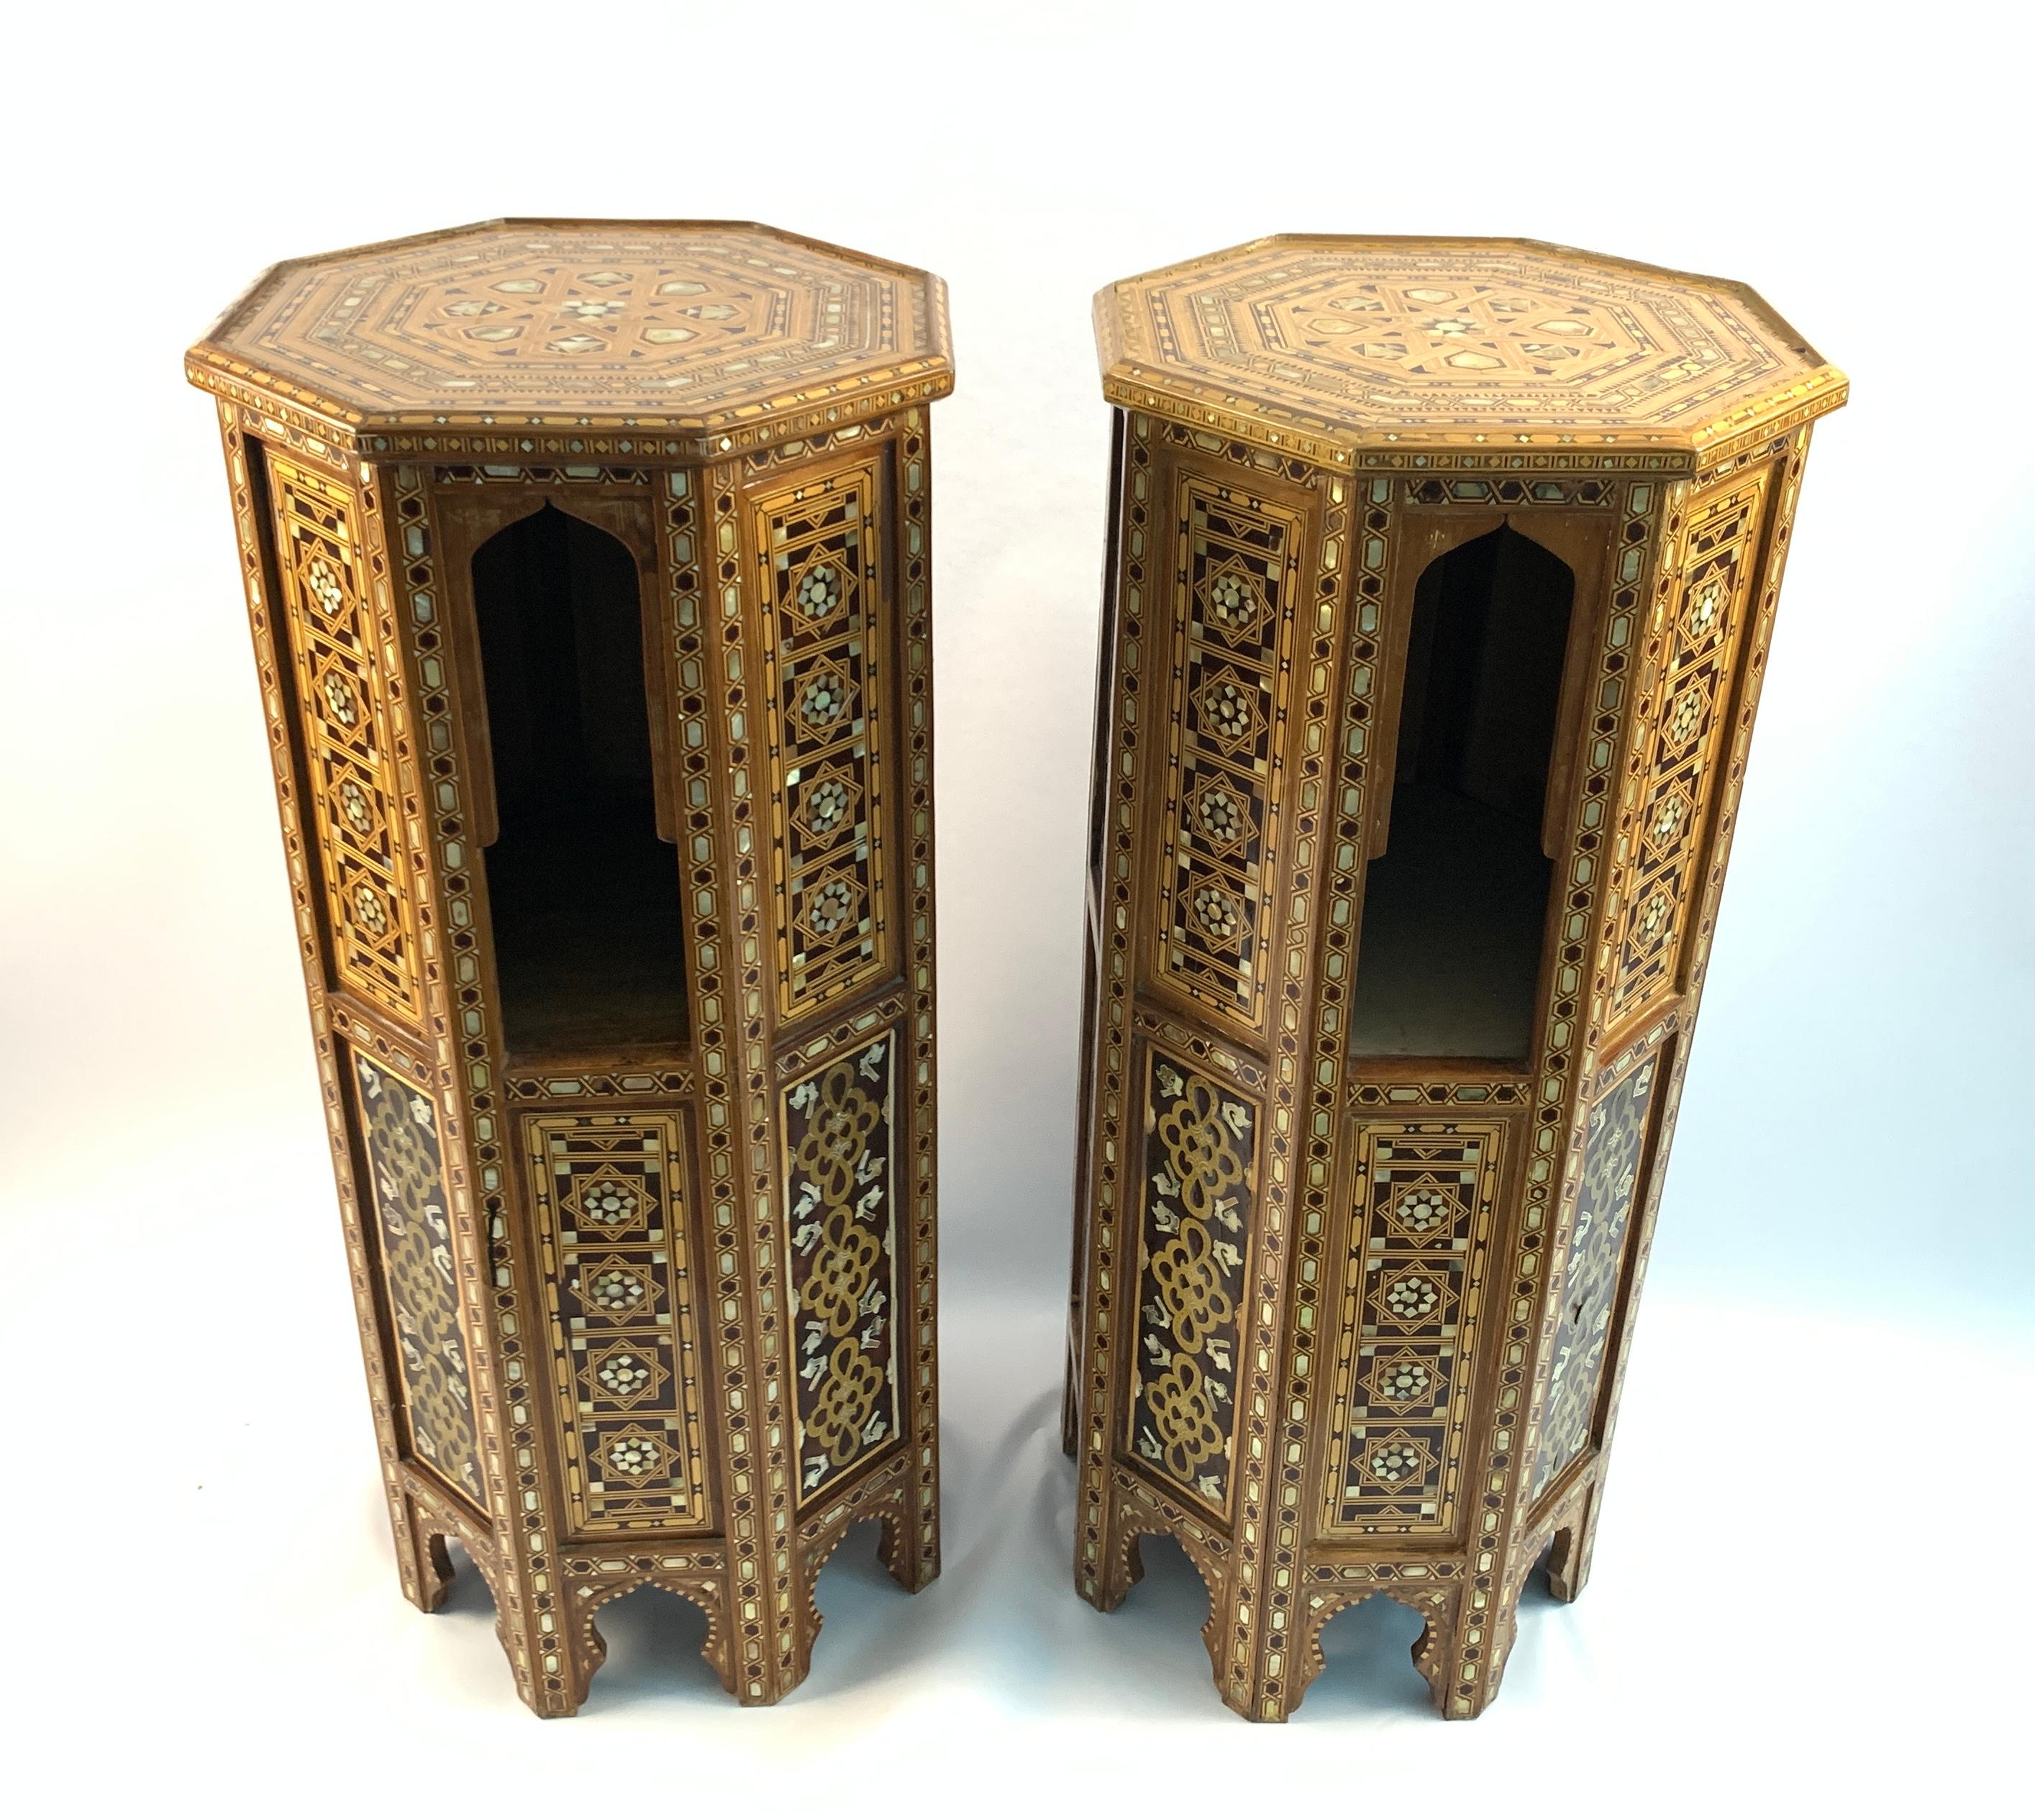 Pair of Ottoman Mother-of-pearl and Tortoiseshell Stands, 19th Century For Sale 2